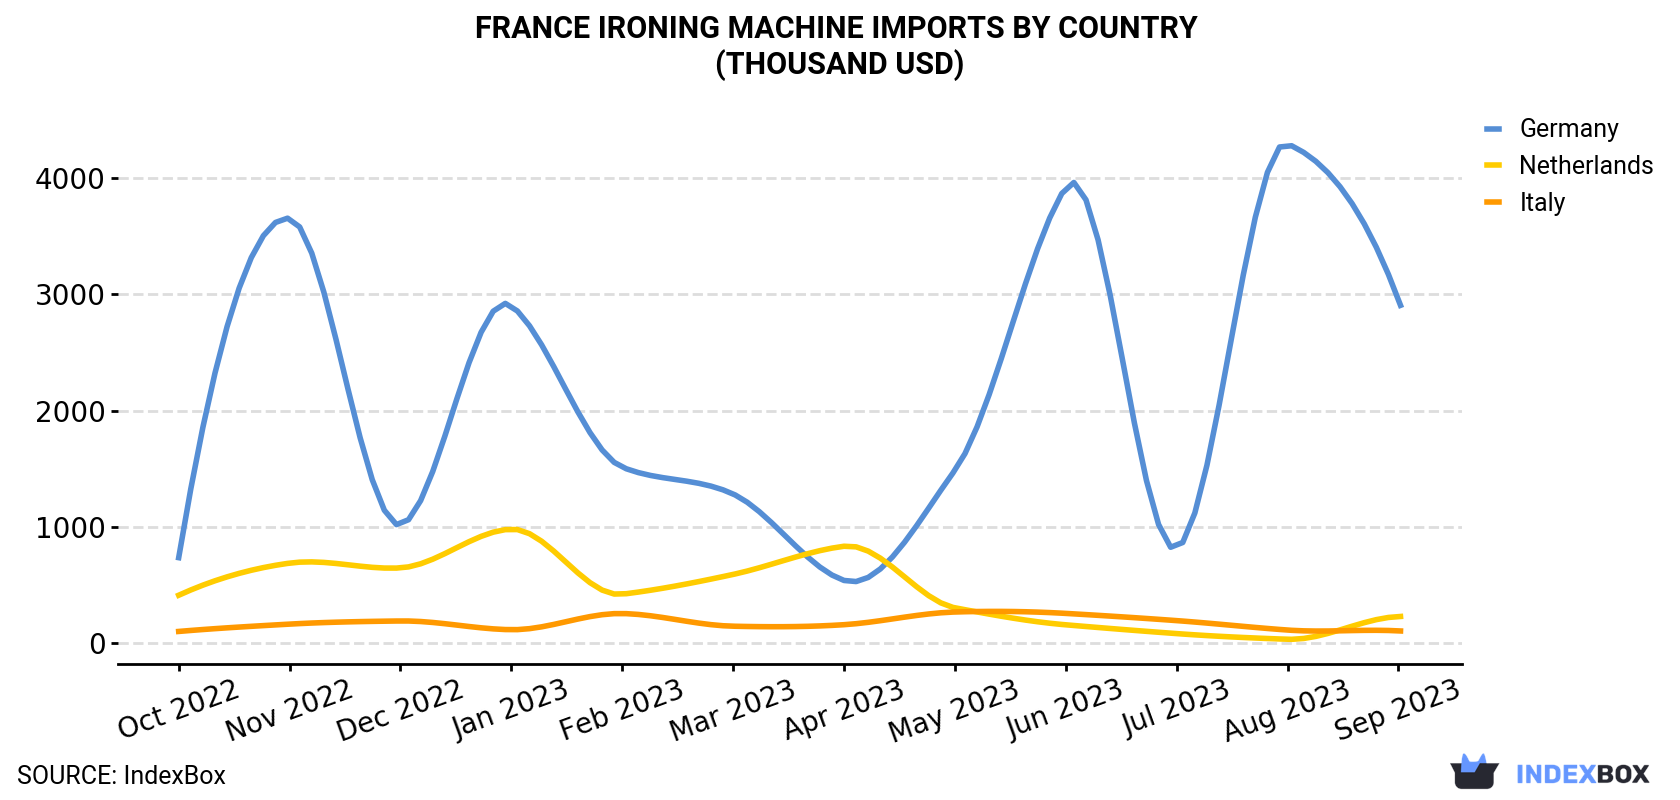 France Ironing Machine Imports By Country (Thousand USD)